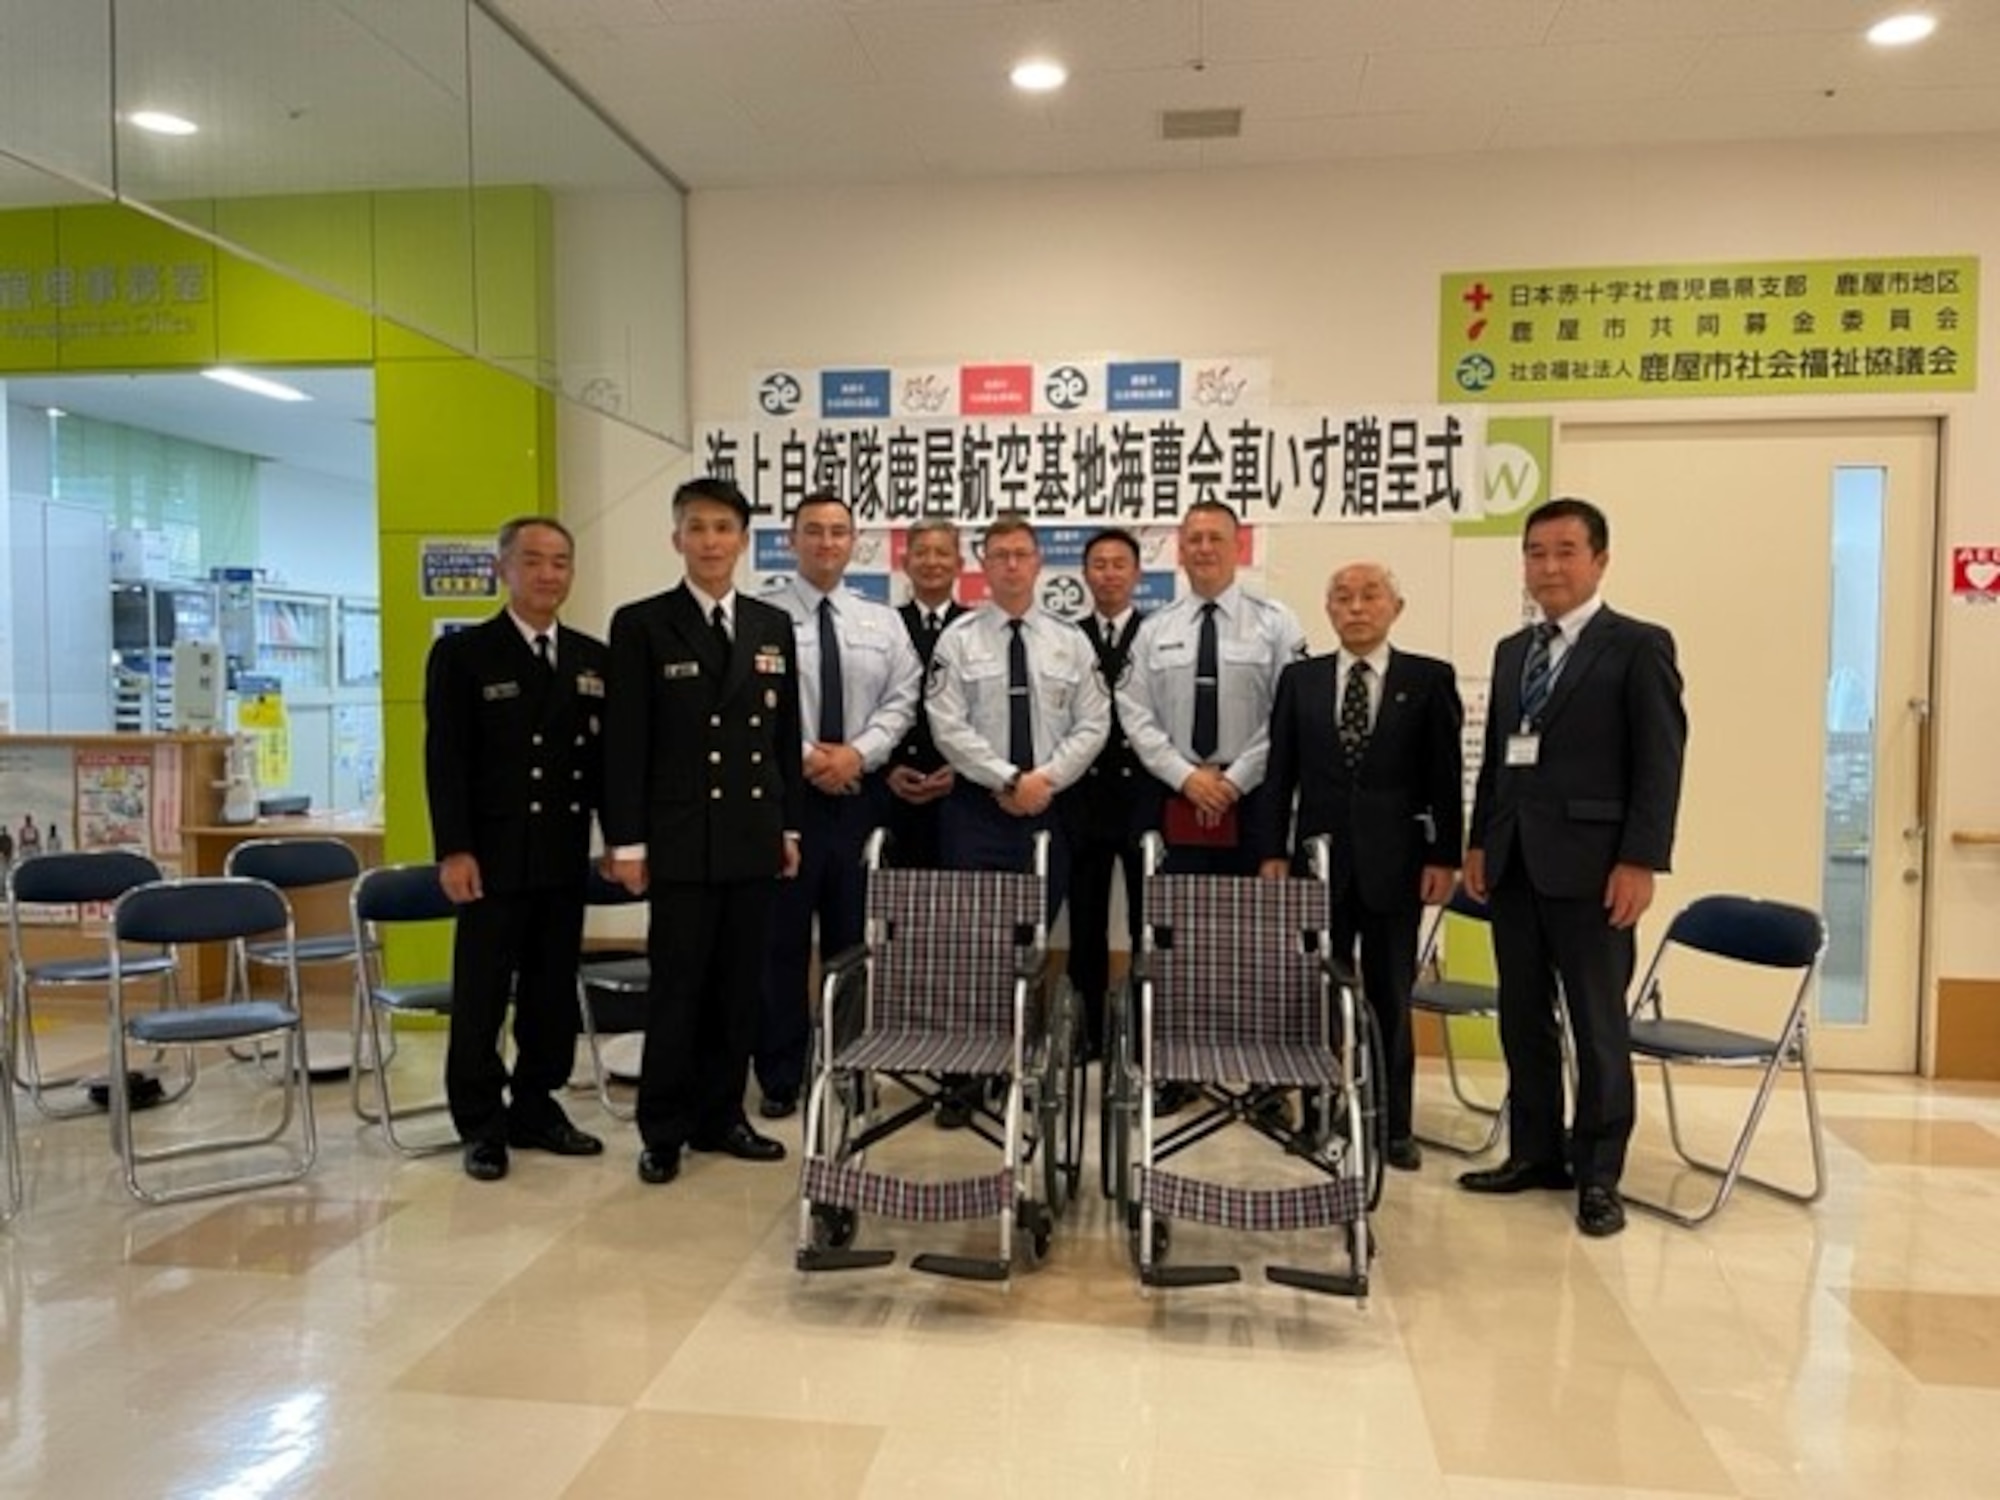 Members of the 319th Expeditionary Reconnaissance Squadron, Japan Maritime Self-Defense Force, and the Kanoya Welfare Association pose for a photo inside the Kanoya Welfare Association building. (Courtesy Photo)